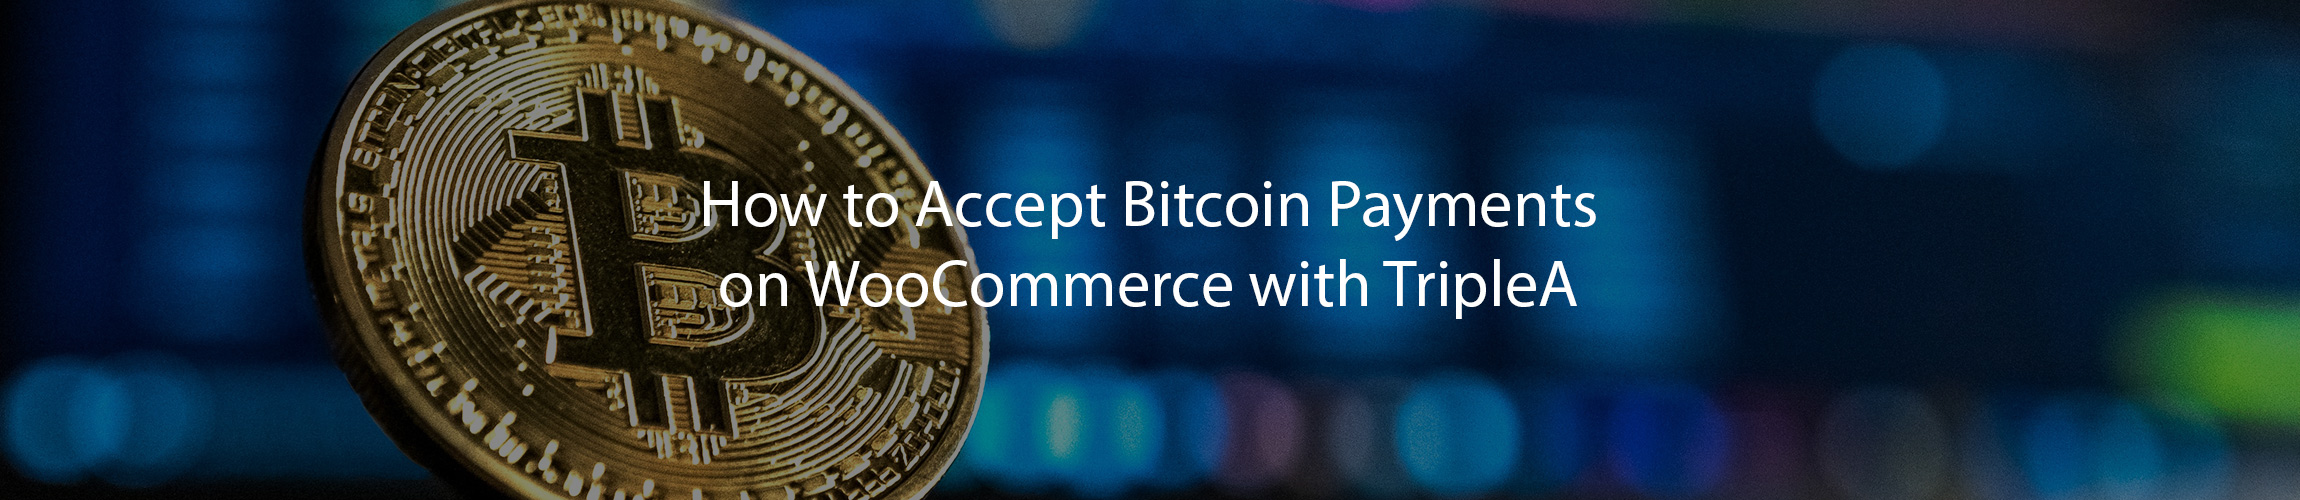 How to Accept Bitcoin Payments on WooCommerce with TripleA